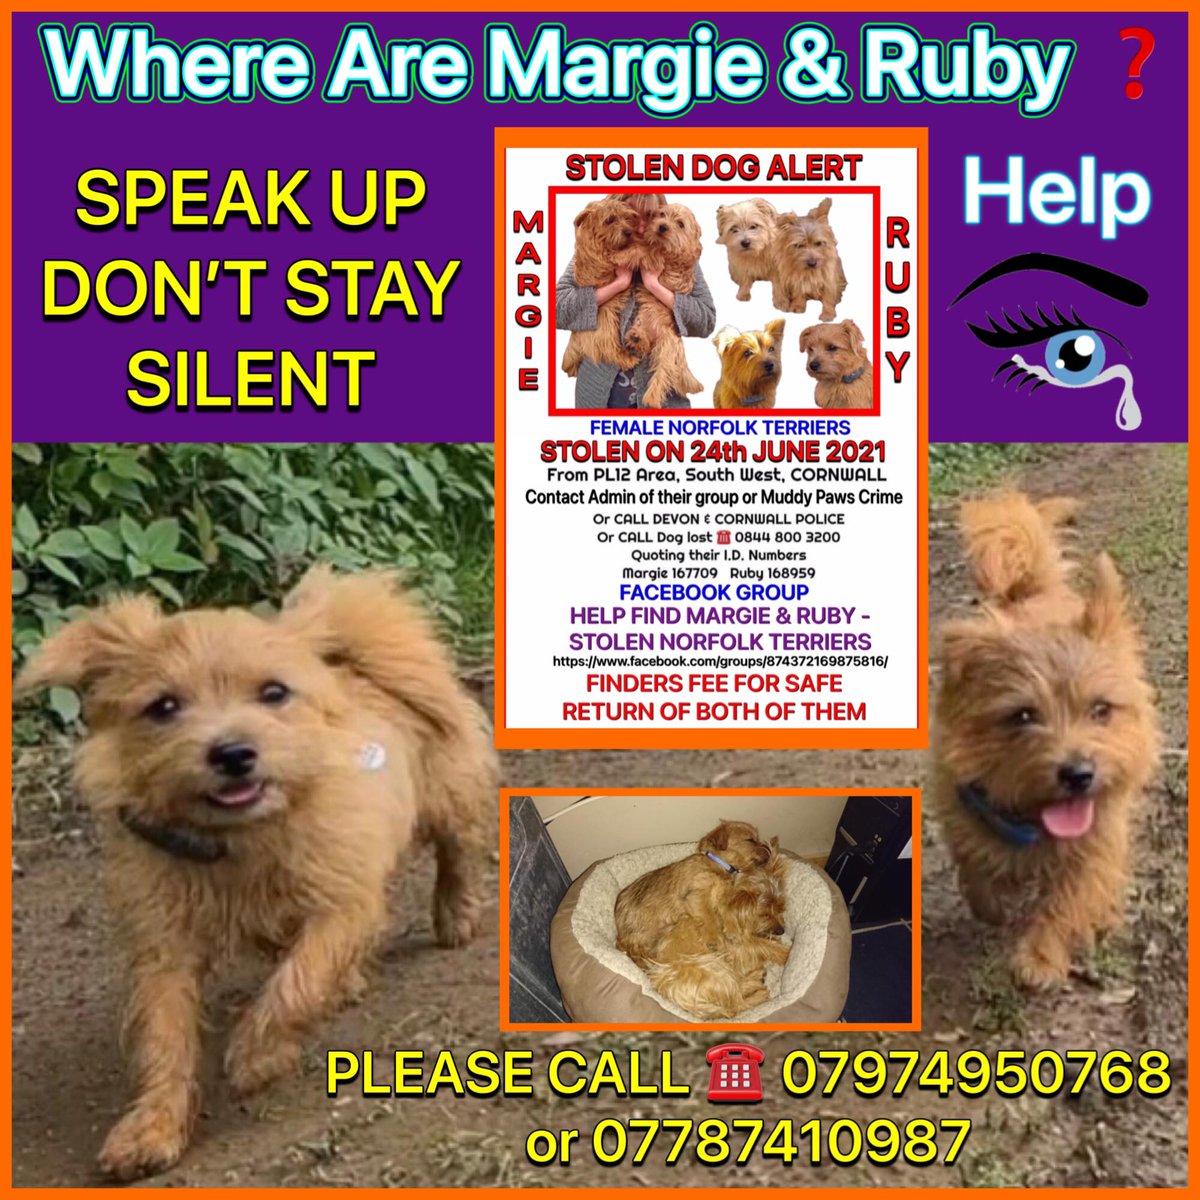 Worst thing EVER is the NOT knowing the whereabouts & health status of your missing family members! Put yourself in the shoes of these two girls' REAL parents & PLEASE come forward if you're harbouring them! Plenty of sad dogs in kennels awaiting adoption! Please @FindMargieruby